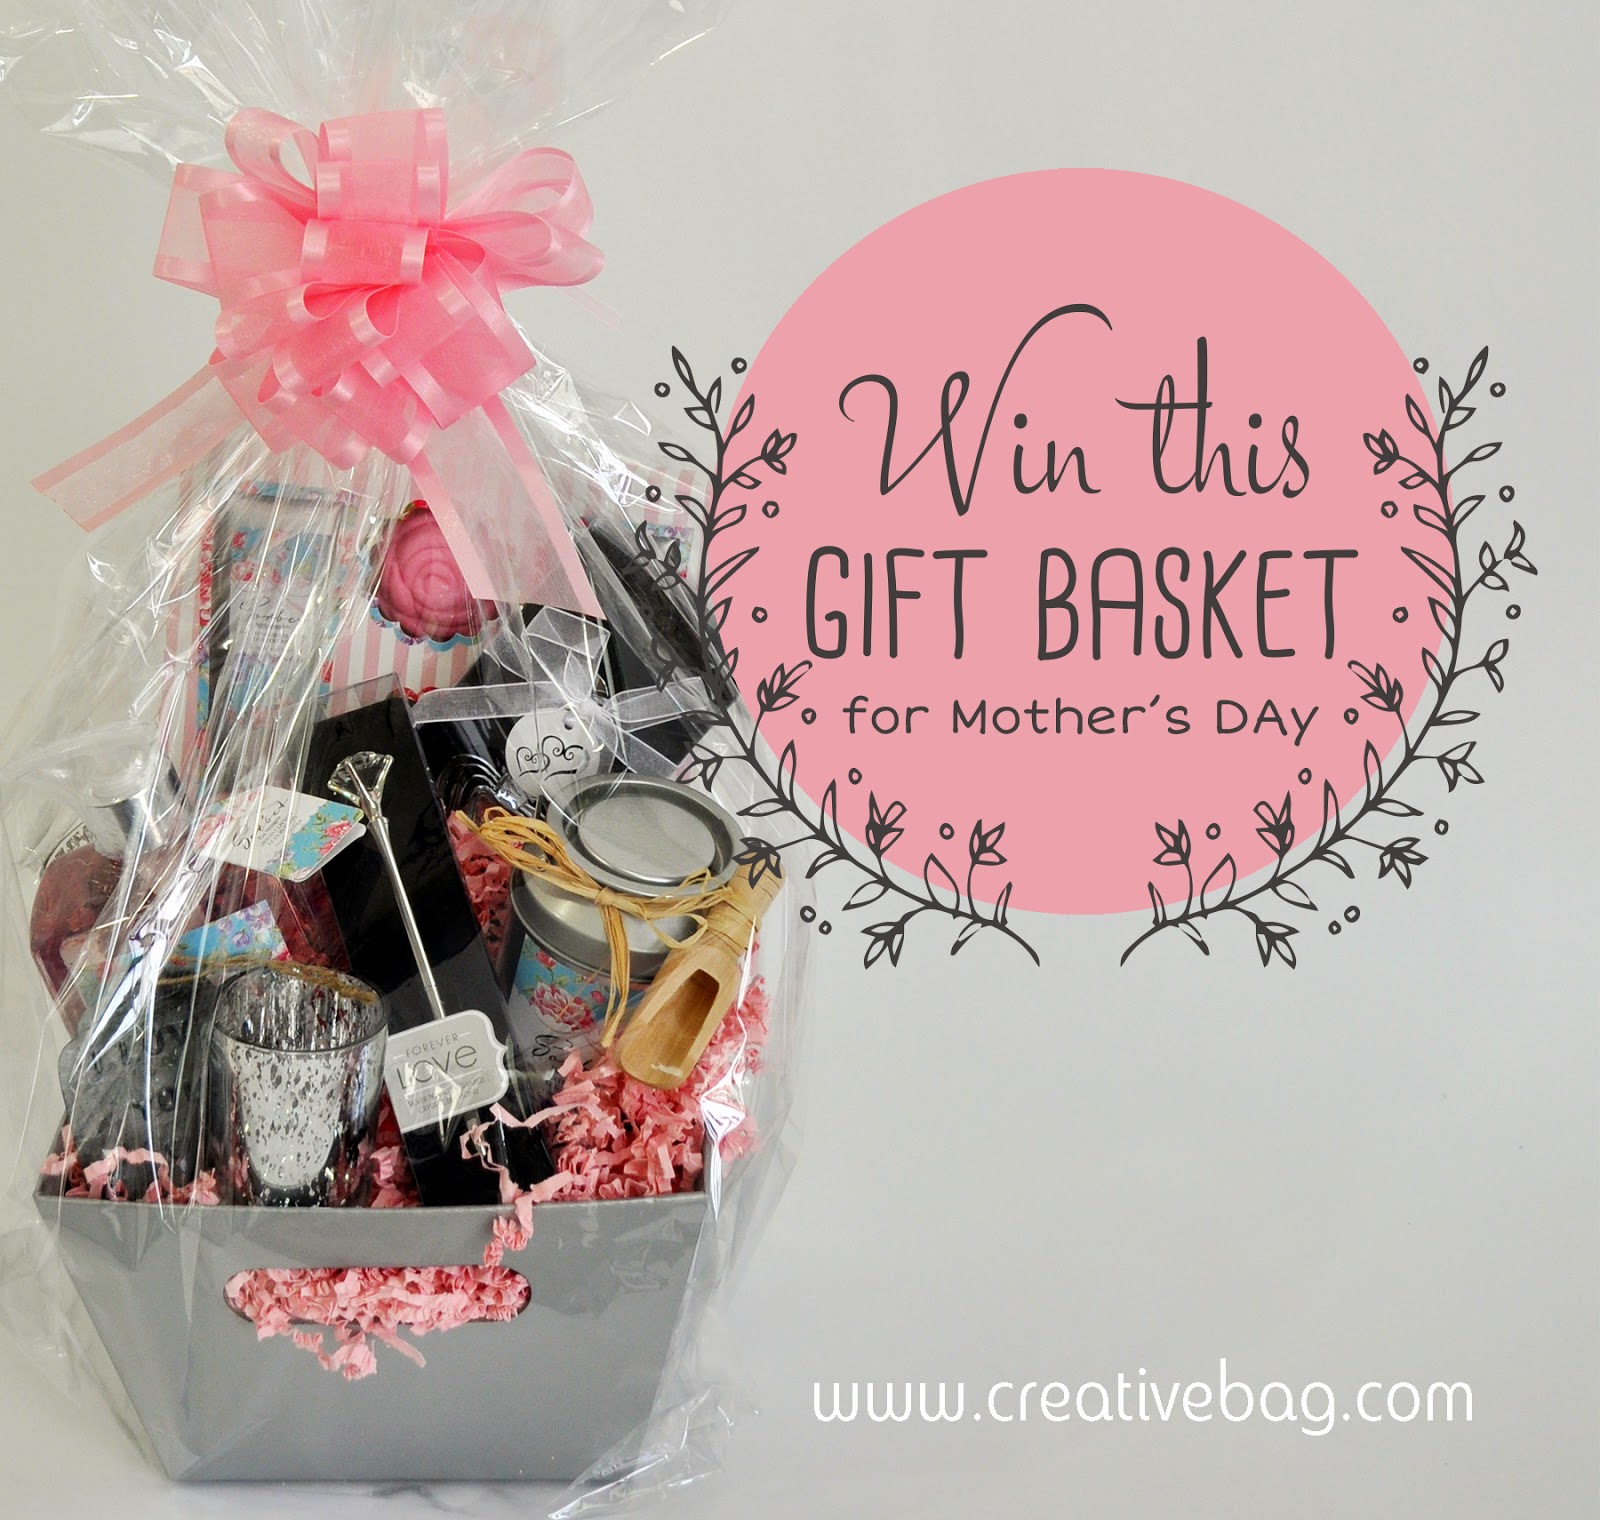 win this gift basket for Mother's Day 2014 from CreativeBag.com